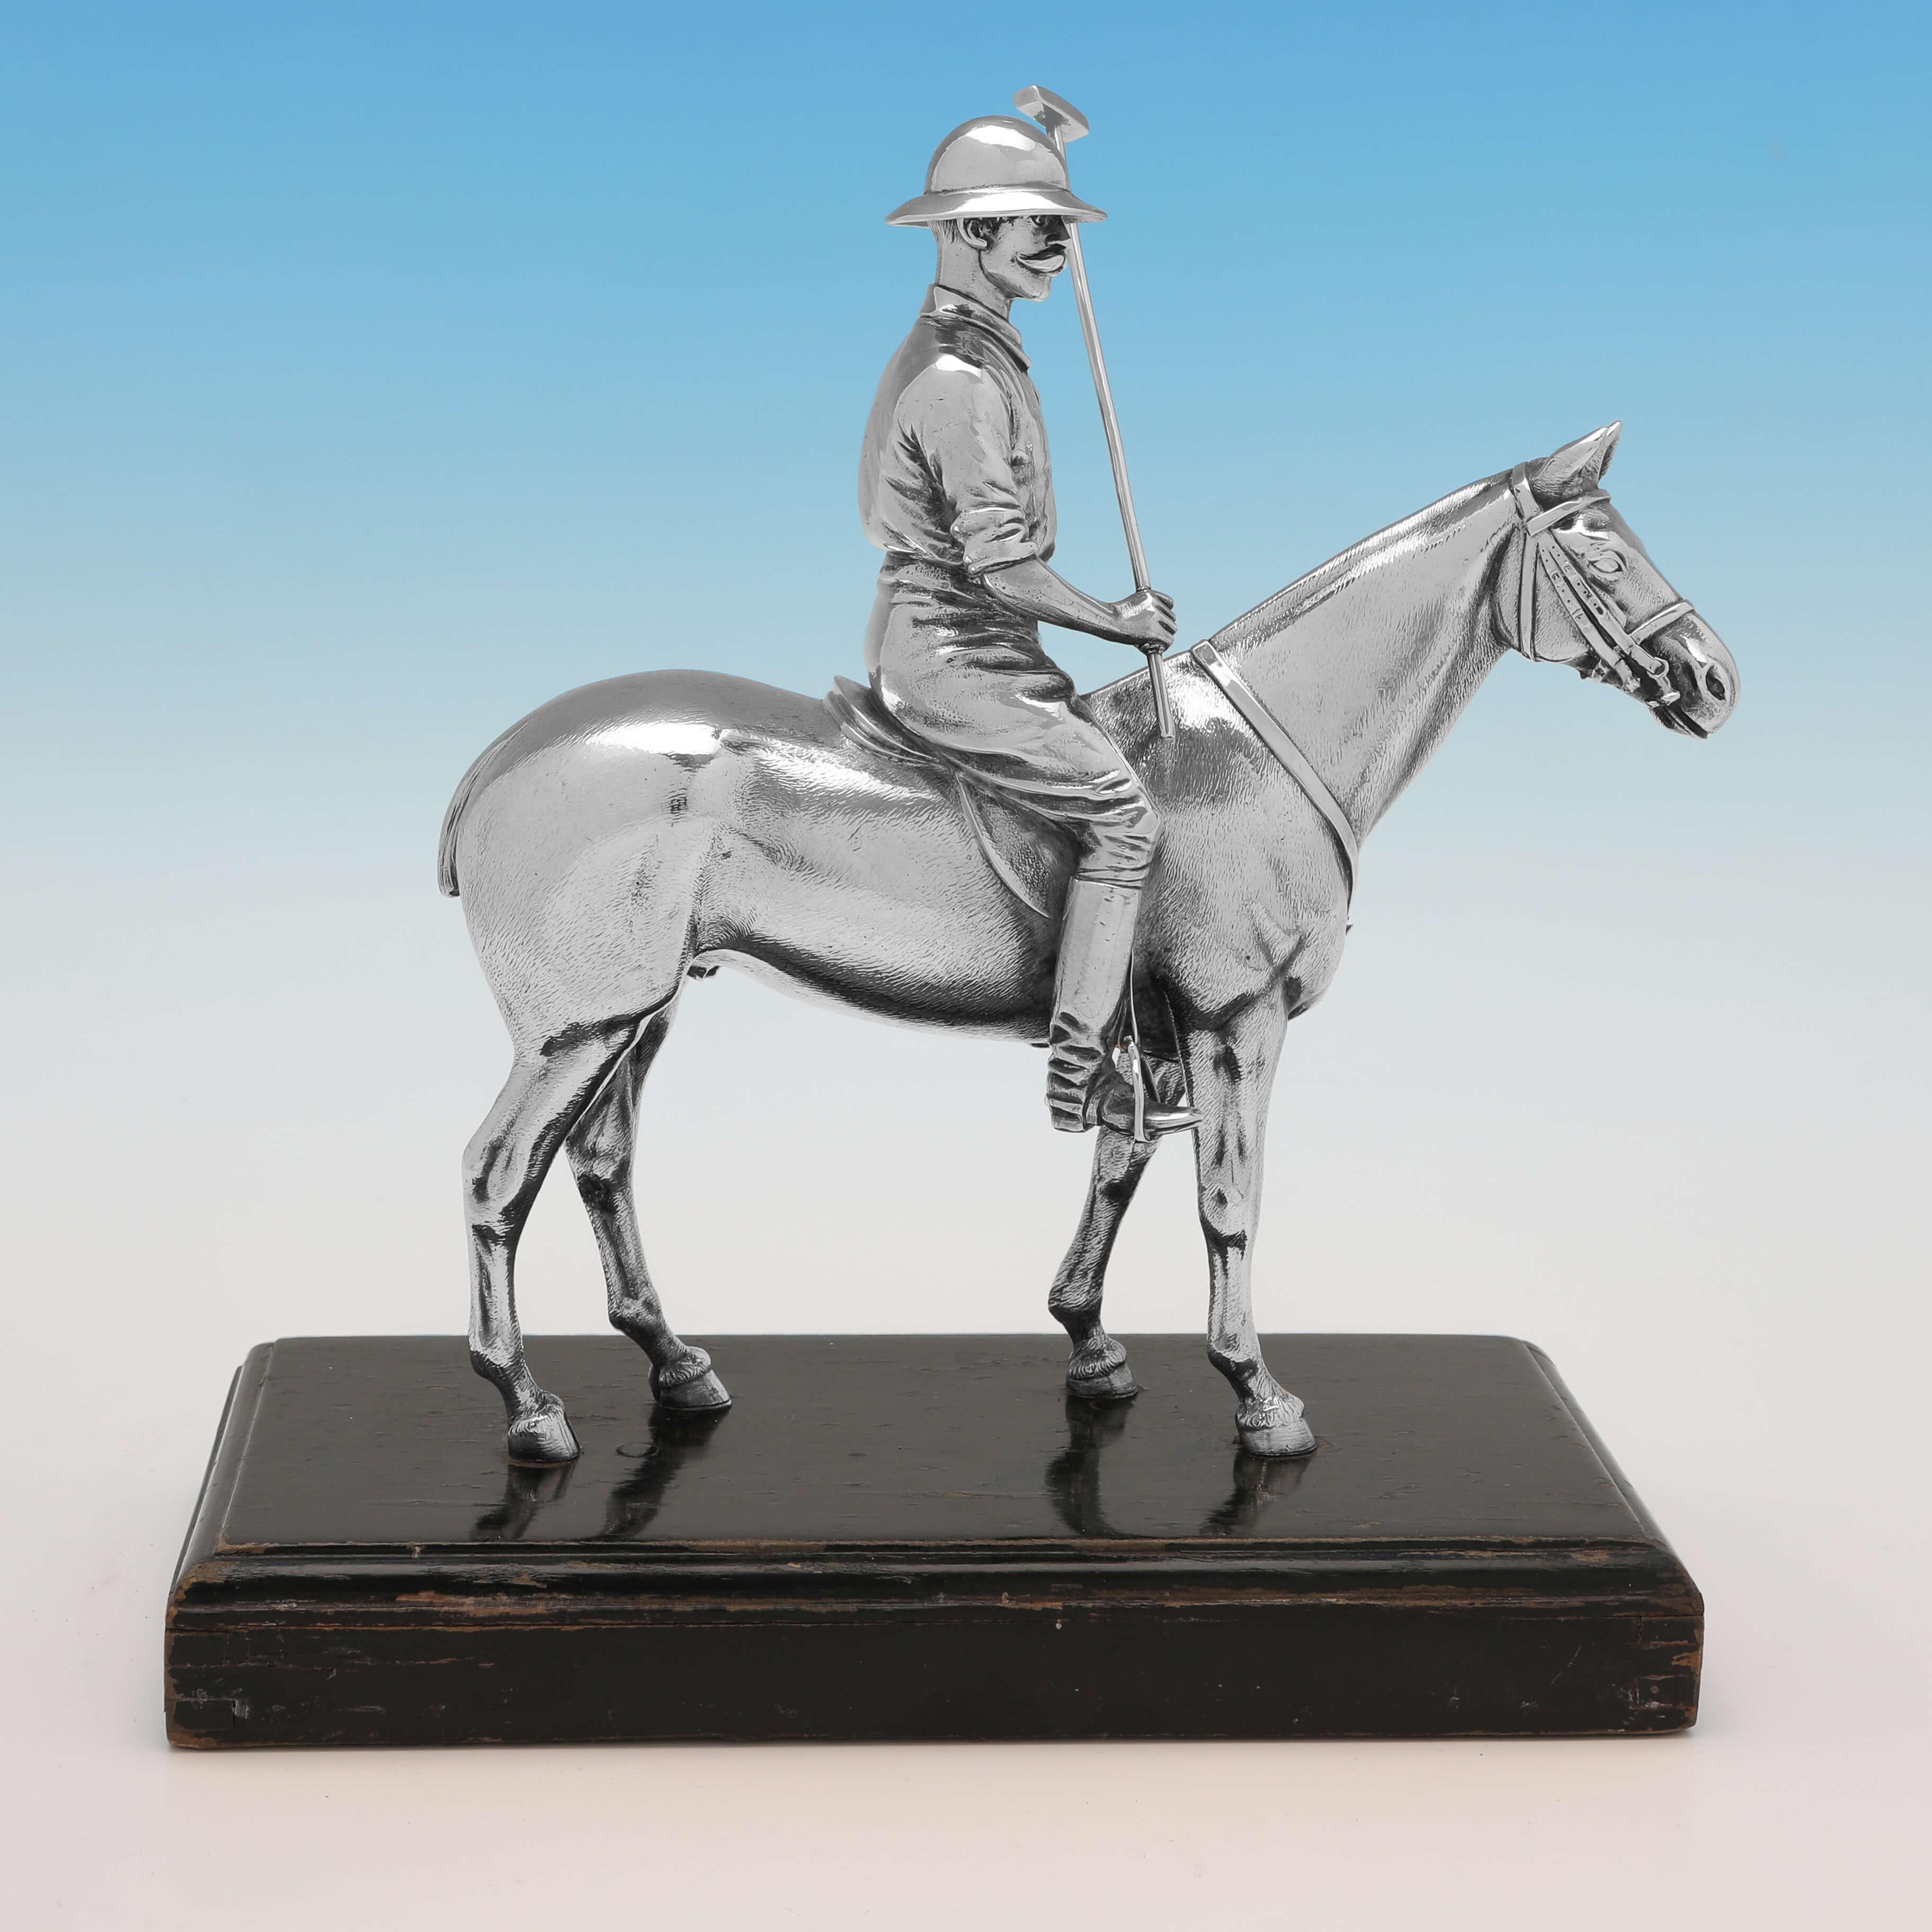 Hallmarked in London in 1908 by Mappin & Webb, this exquisite, Antique Sterling Silver Model of a Polo Horse and Player, is wonderfully detailed. 

The model measures 7.5